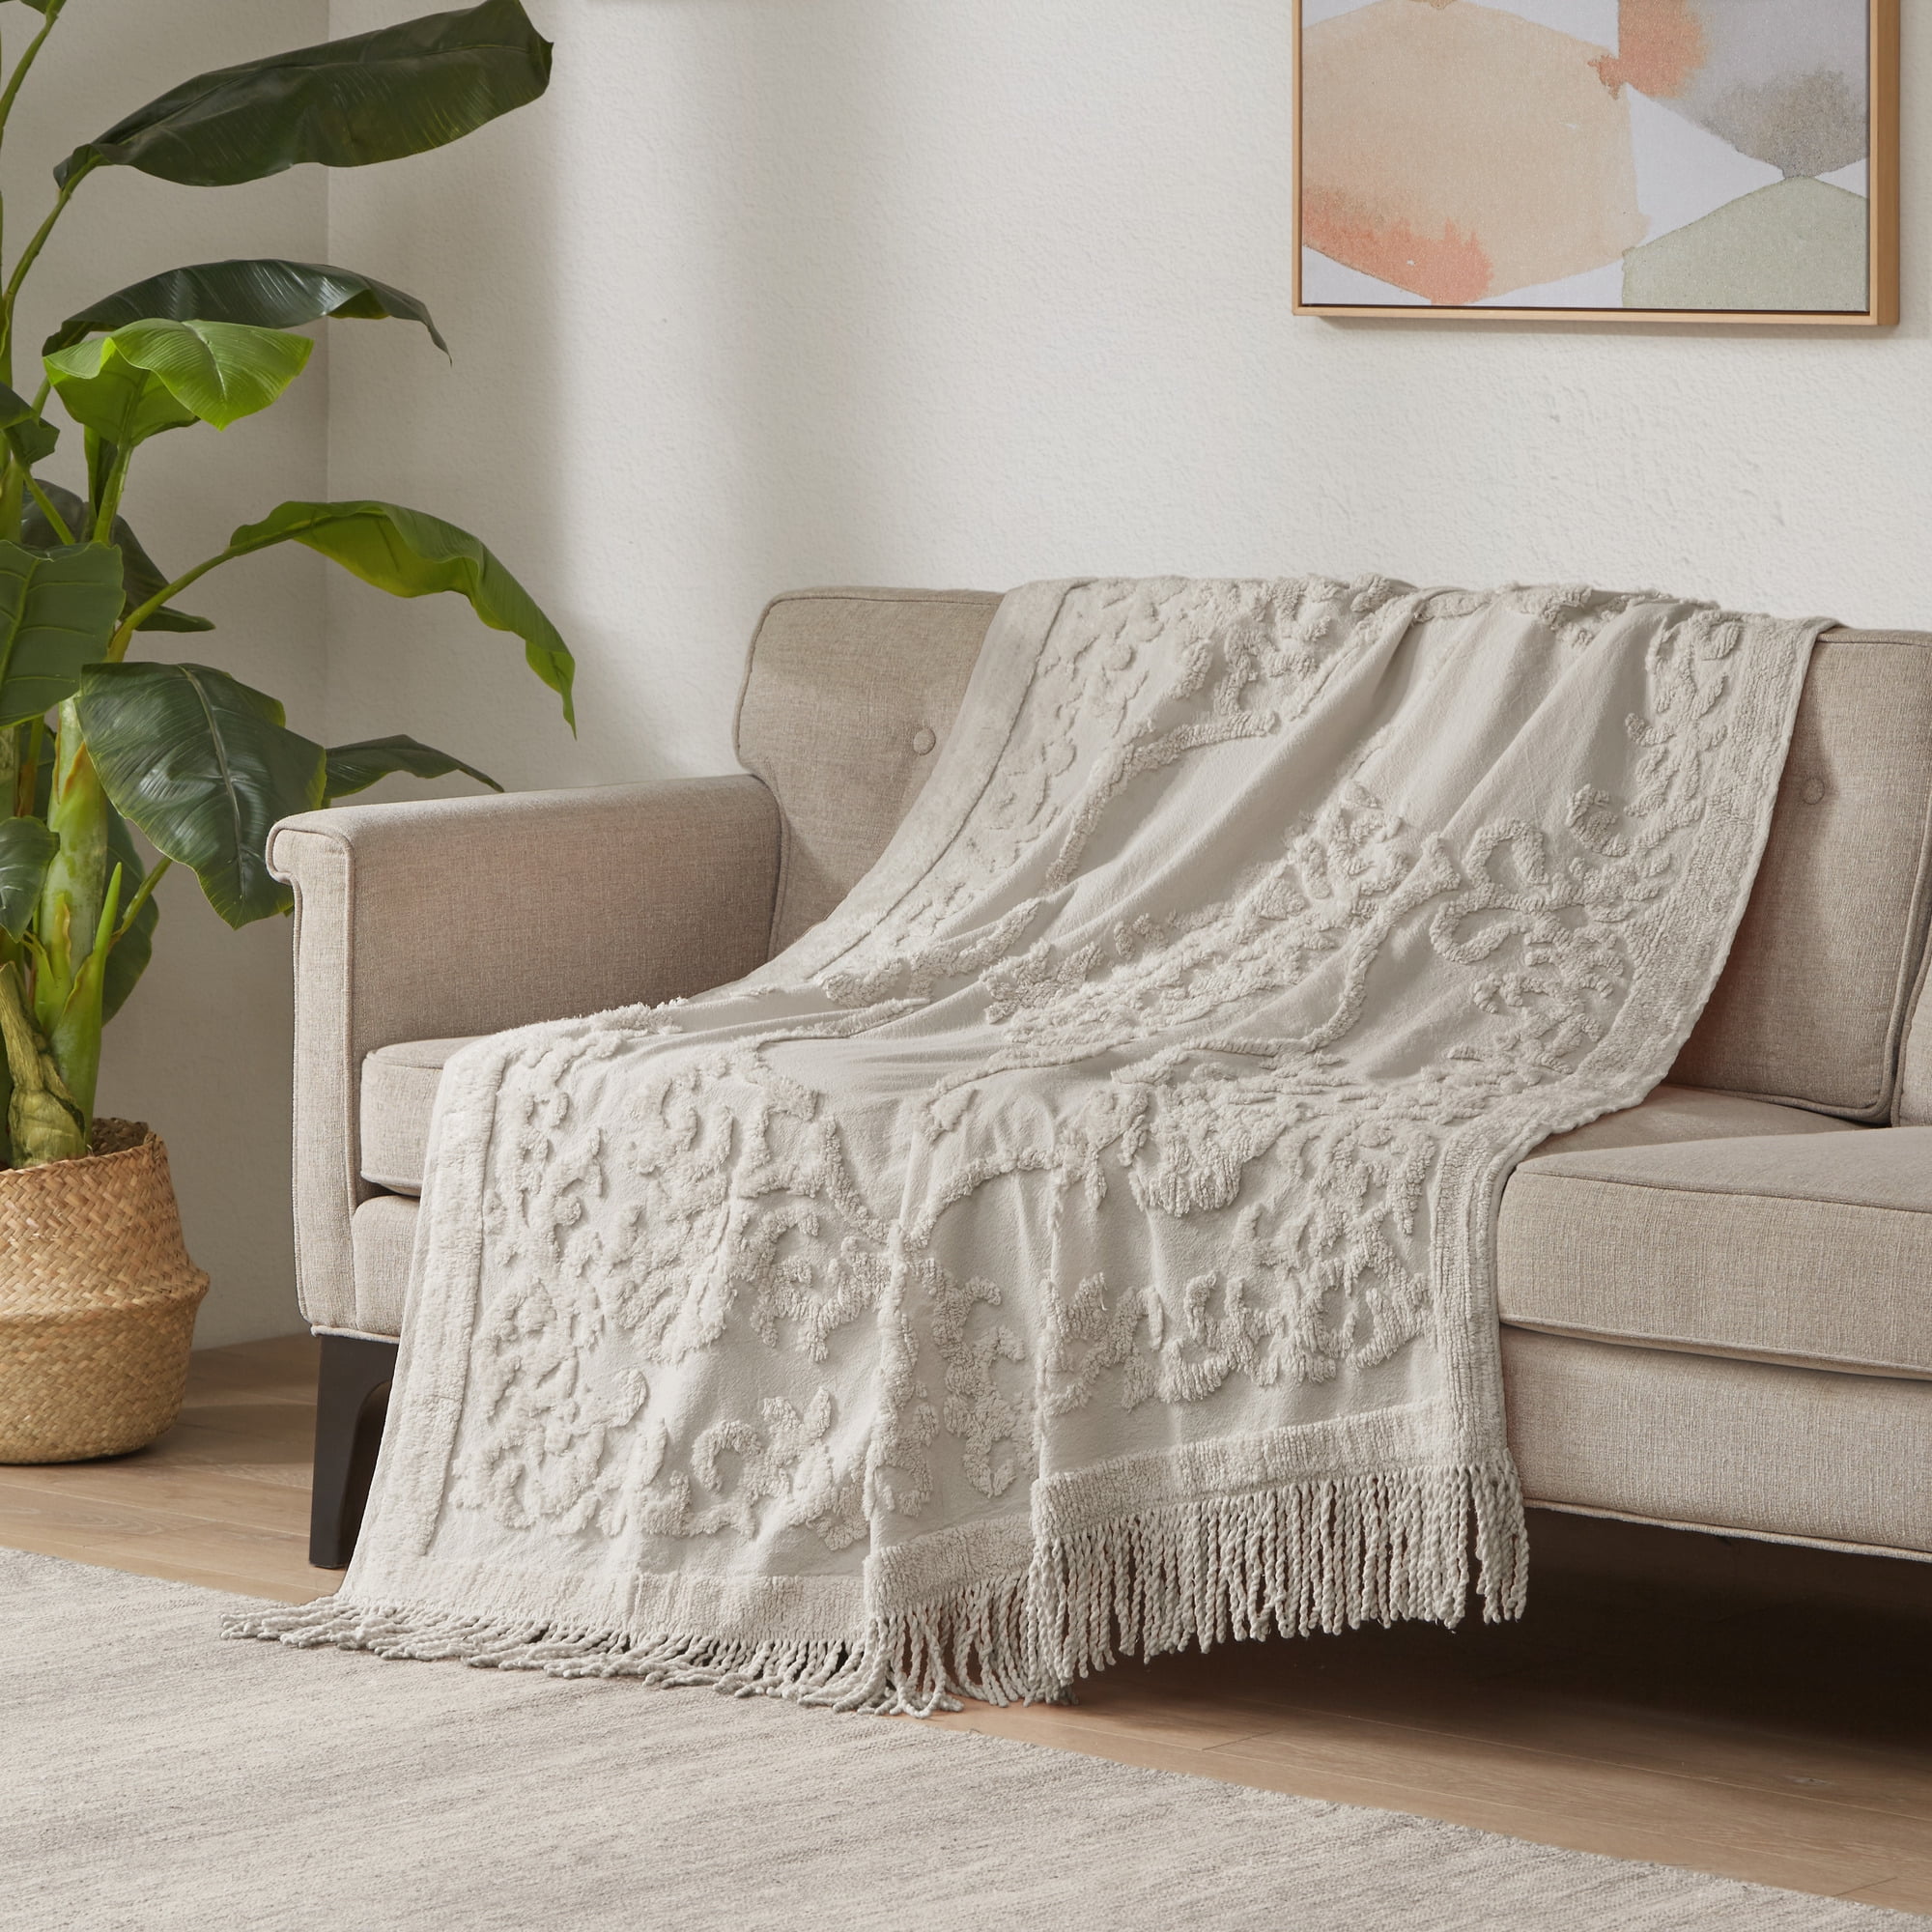 Bliss Quilted Throw Overs,Blush Pink Or Mink,Super Soft Lovely Quality,FREE P&P 